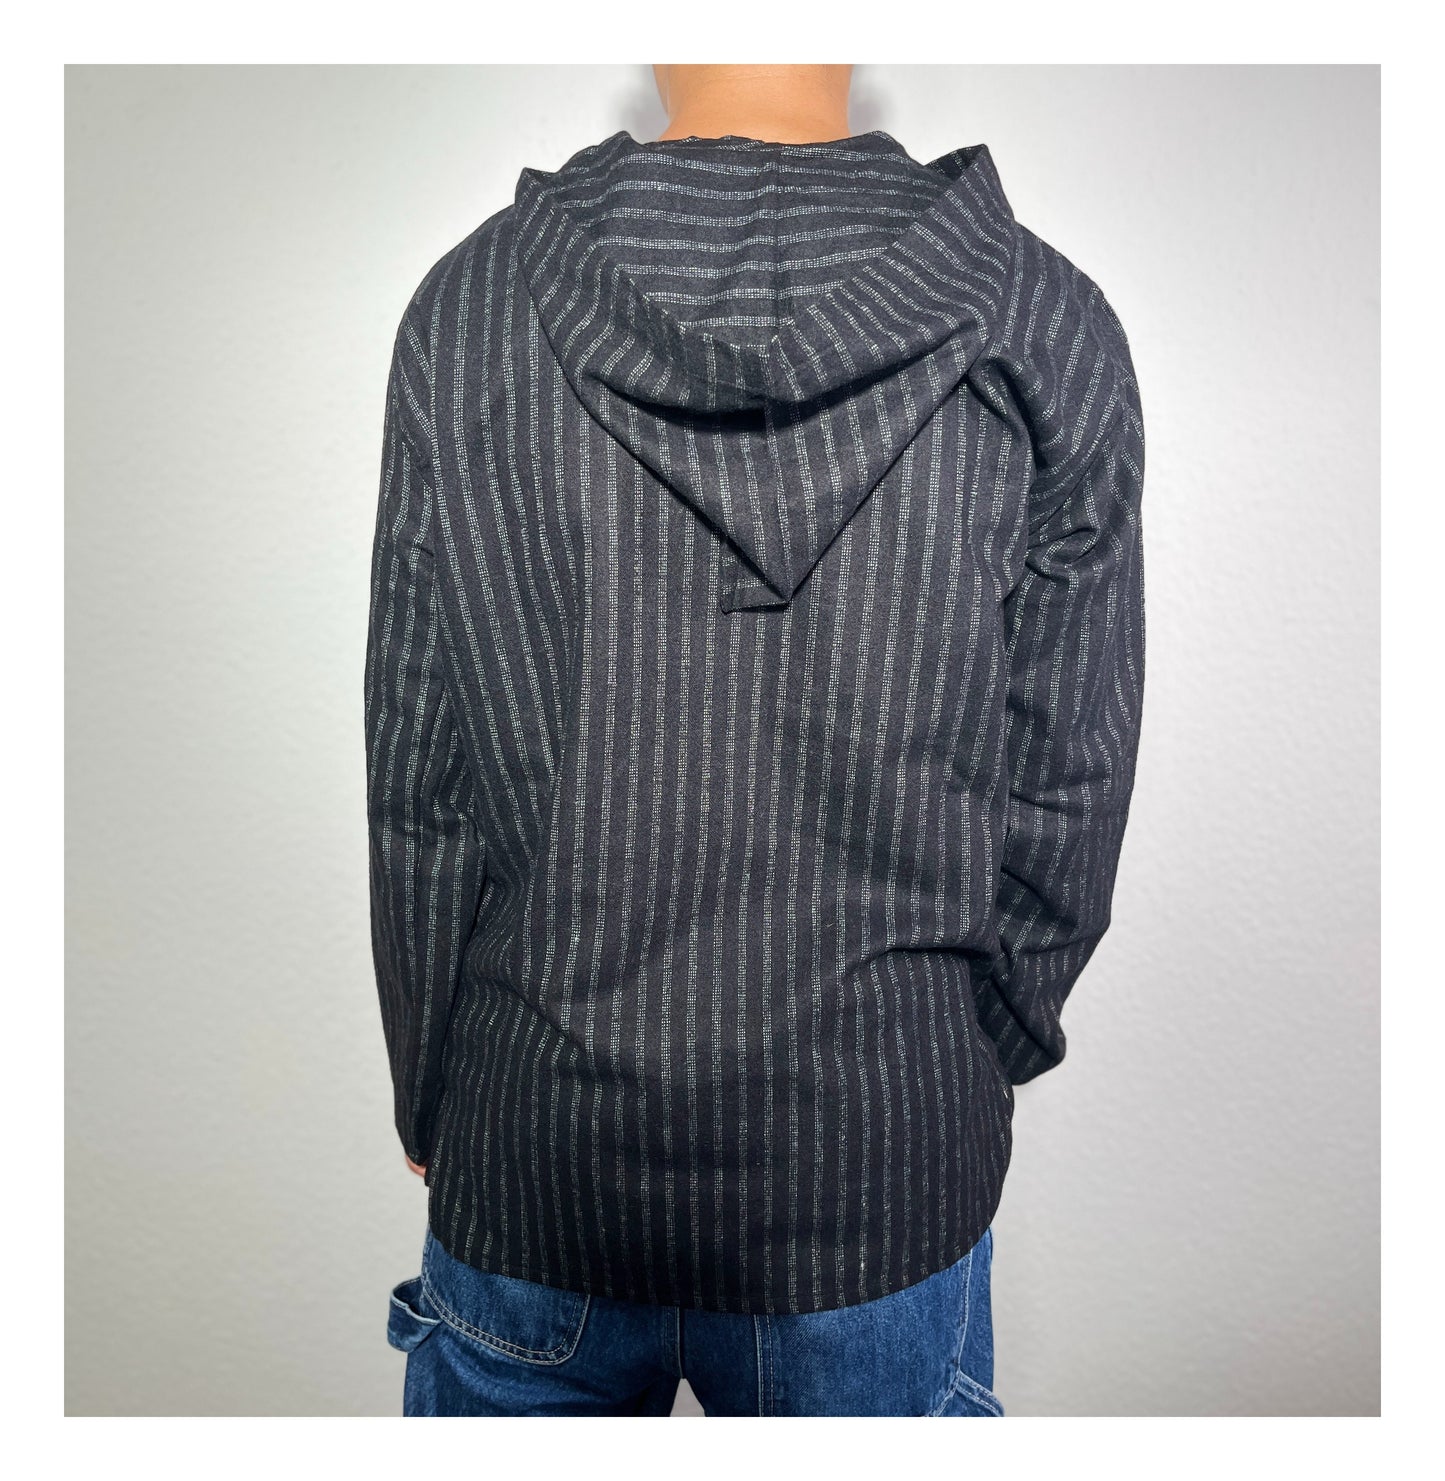 5.0 Artisan Moroccan Hooded Sweater: Style in Wool and Cotton